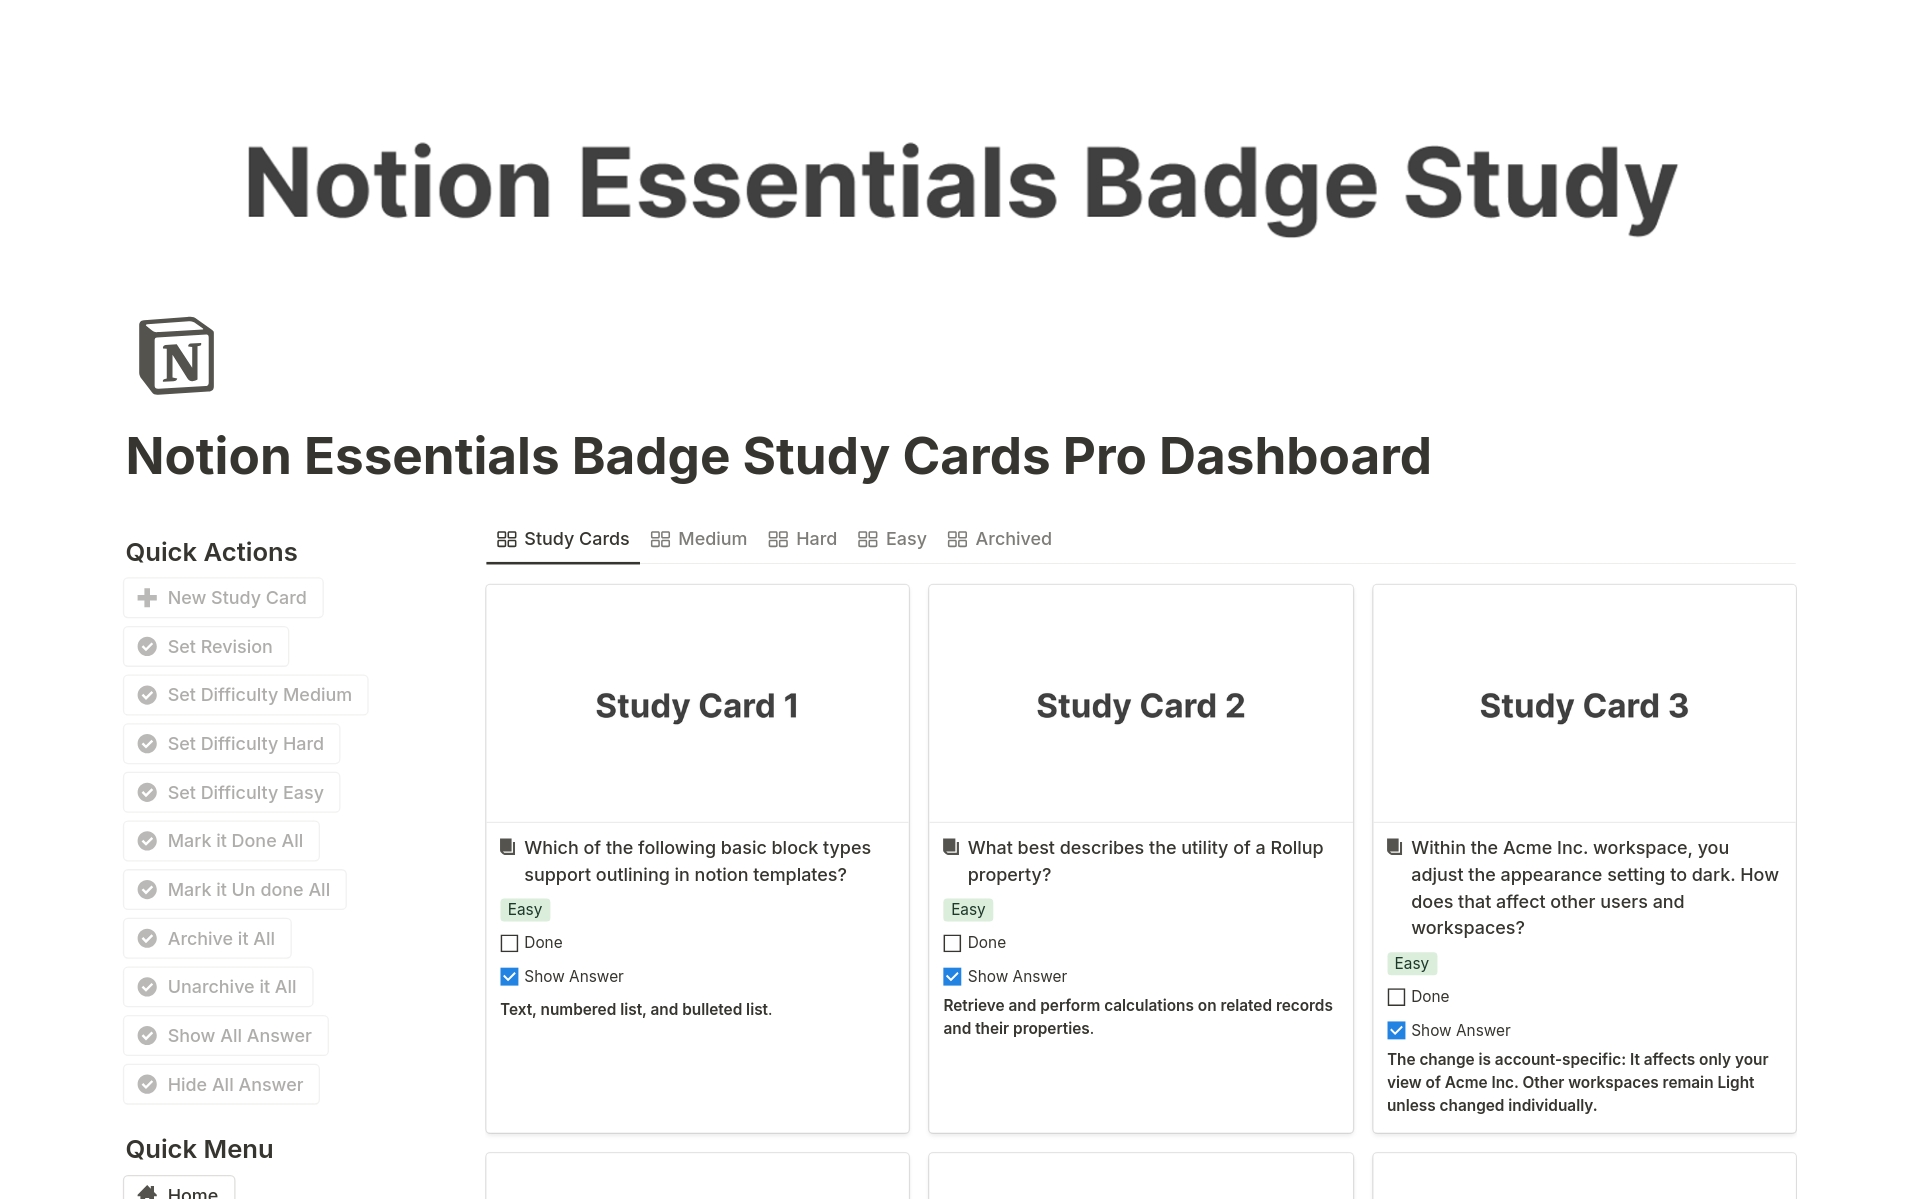 Notion Essentials Badge Study Cards Pro

🚀 Elevate Your Notion Mastery: The Ultimate Notion Essentials Badge Study Cards Pro 🚀